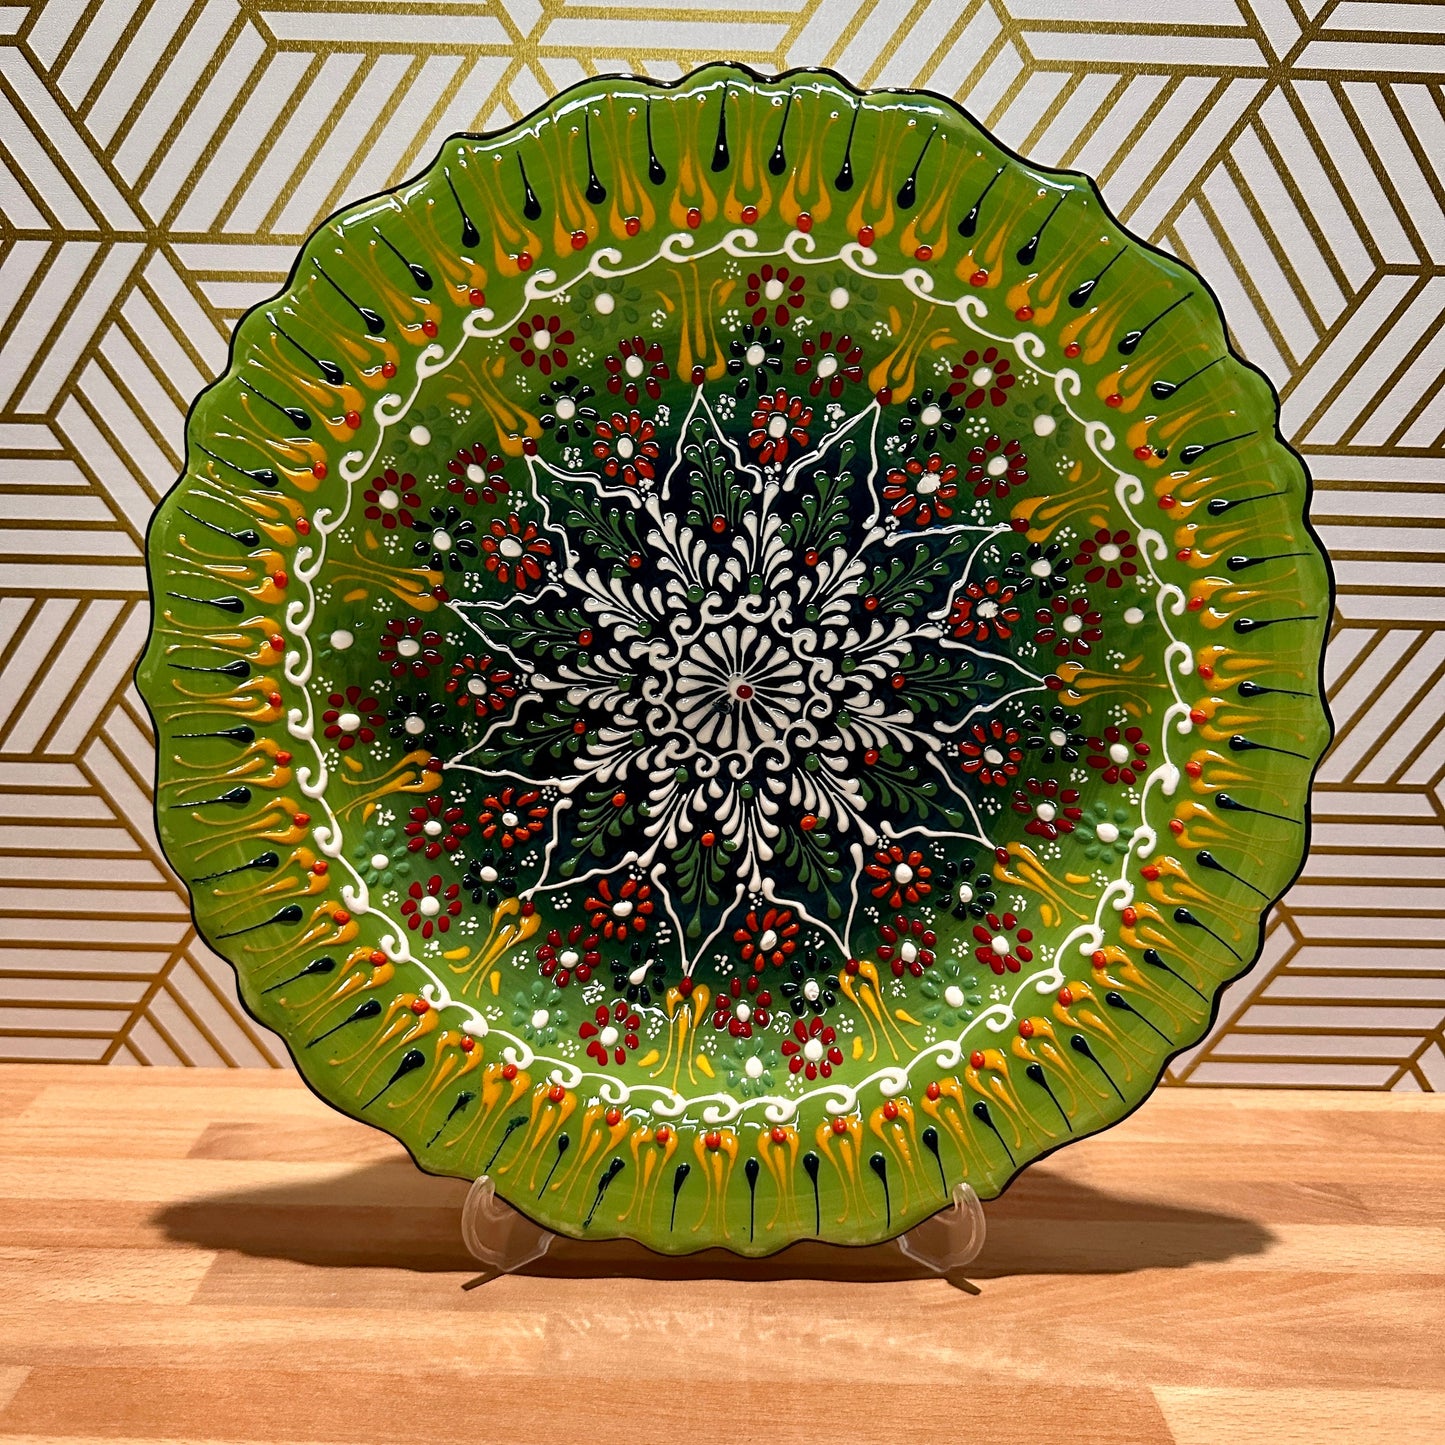 12” Turkish Ceramic Handmade & Painted Plate - Bright Green Dot Art Floral Tulip Patterned - Wall Hanging or Stand Use - Quick Ship!